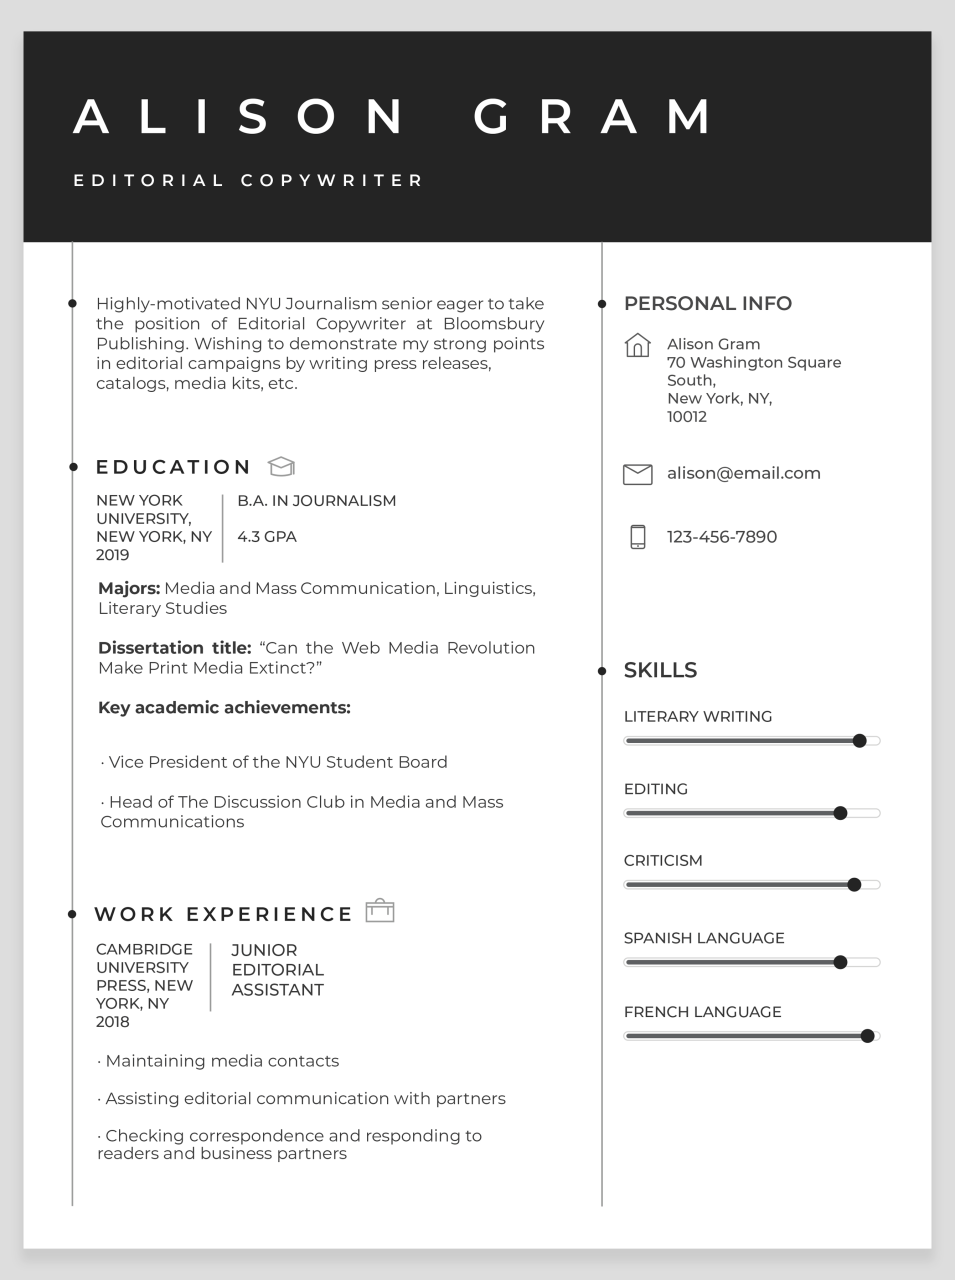 How to make a stunning resume [CV template inside]